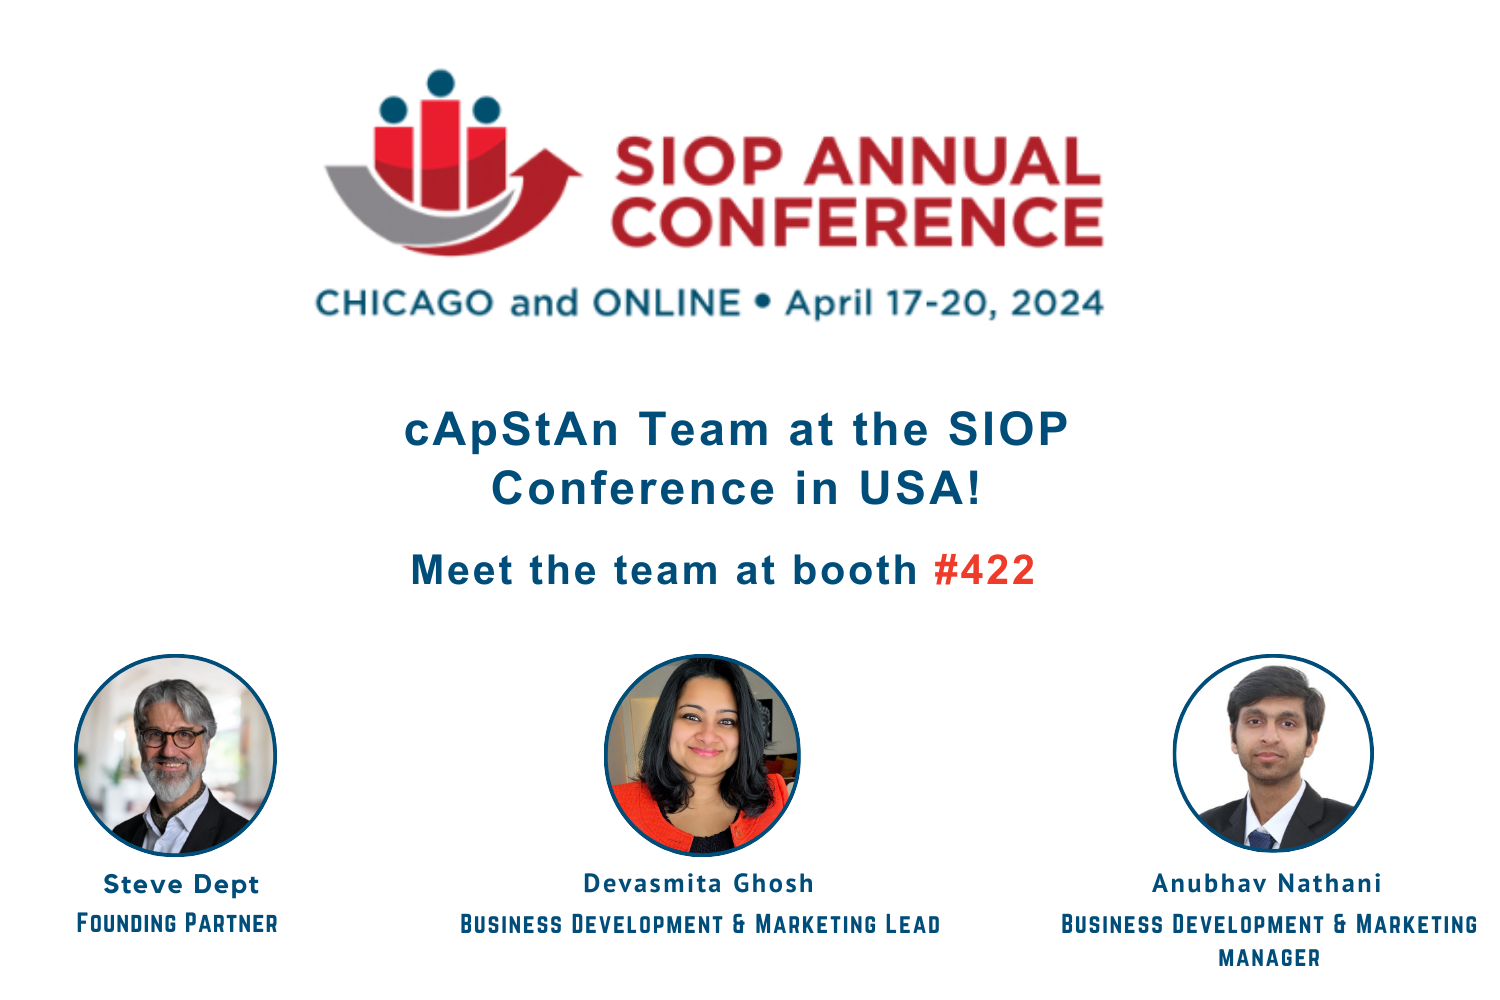 SIOP Annual Conference 2024 in Chicago